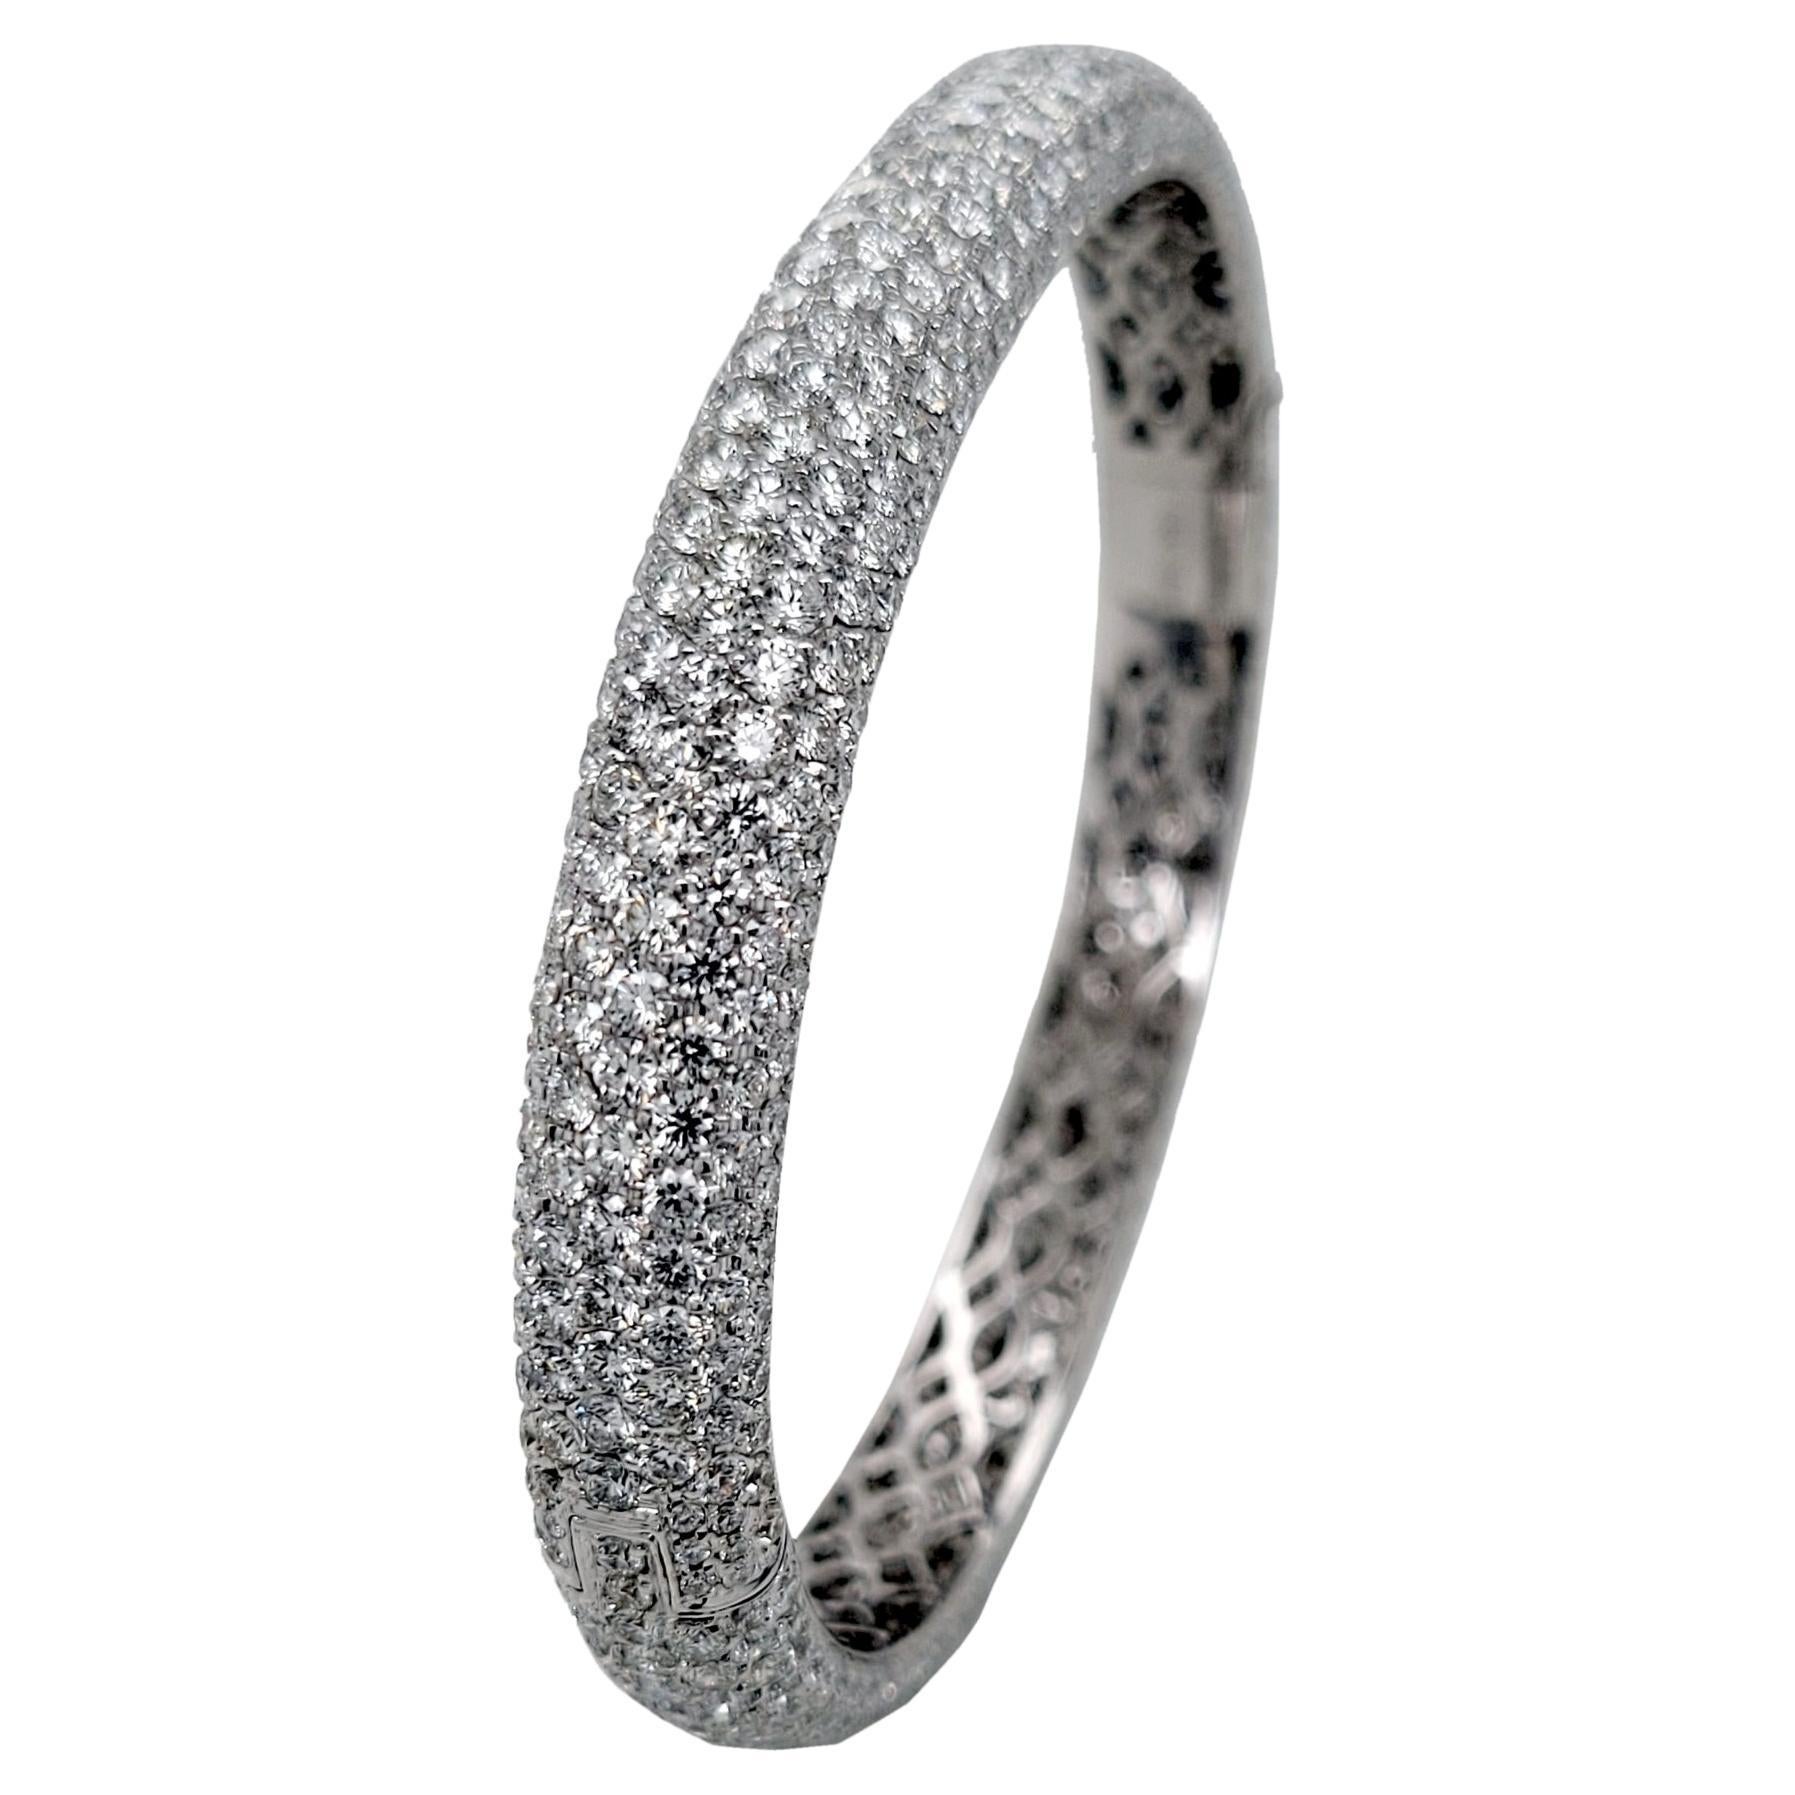 This elegant Oval Shaped Pave Set Diamond Bangle Bracelet is made in 18K White Gold and it is 2.75x2.25  inch in dimension and 8.1 mm wide. This bracelet is made by the highest quality craftsmanship as it can be seen in pictures detailing the piece.